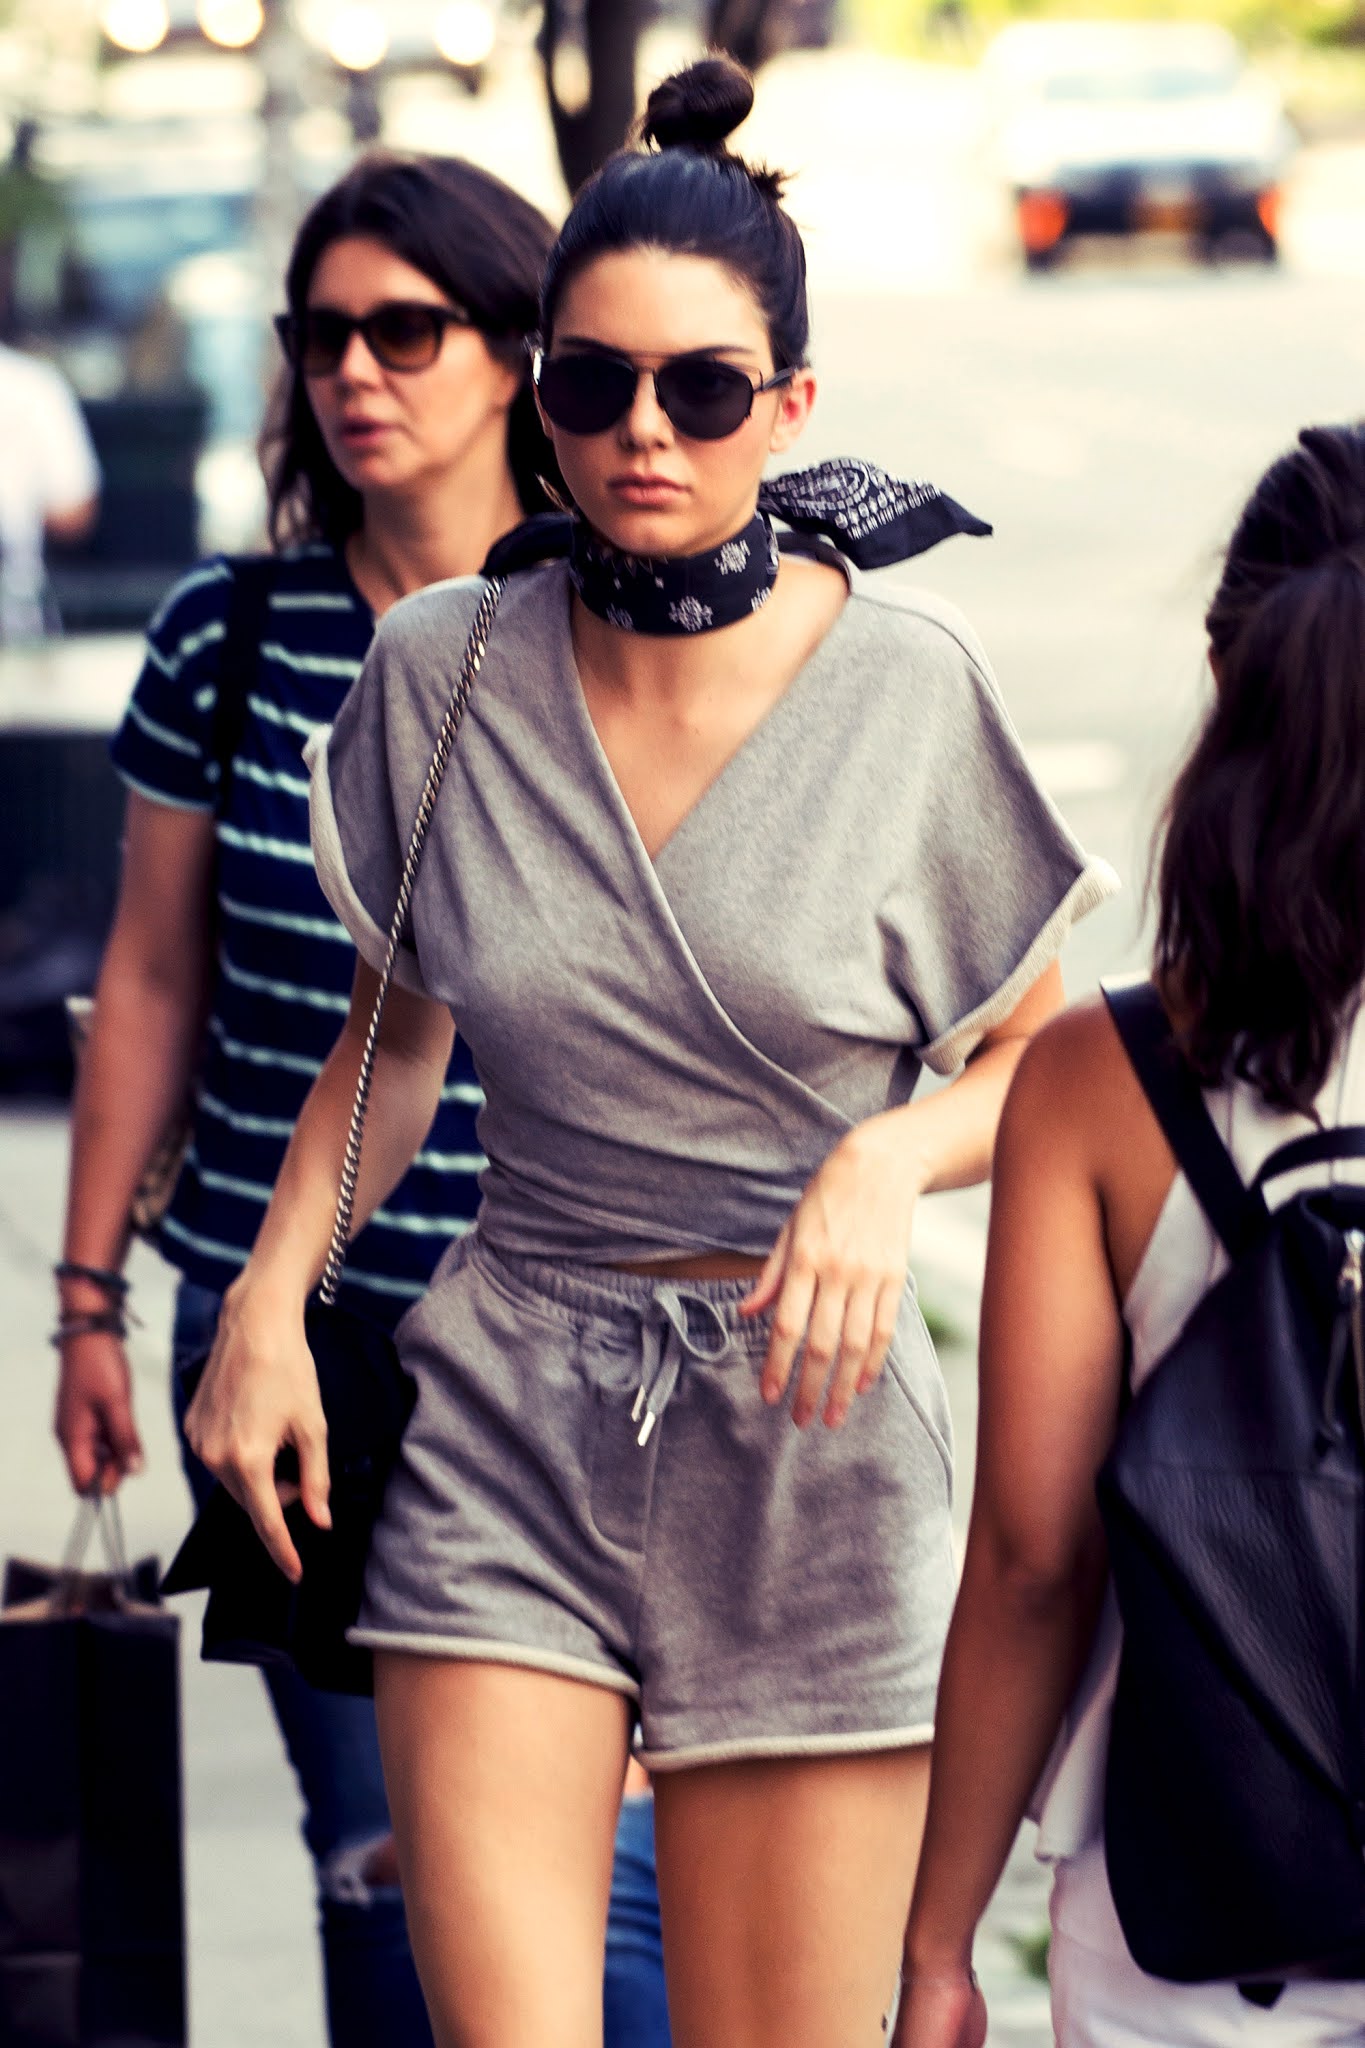 Jun 19th 2016 Out in New York | Kendall Jenner Fans Page